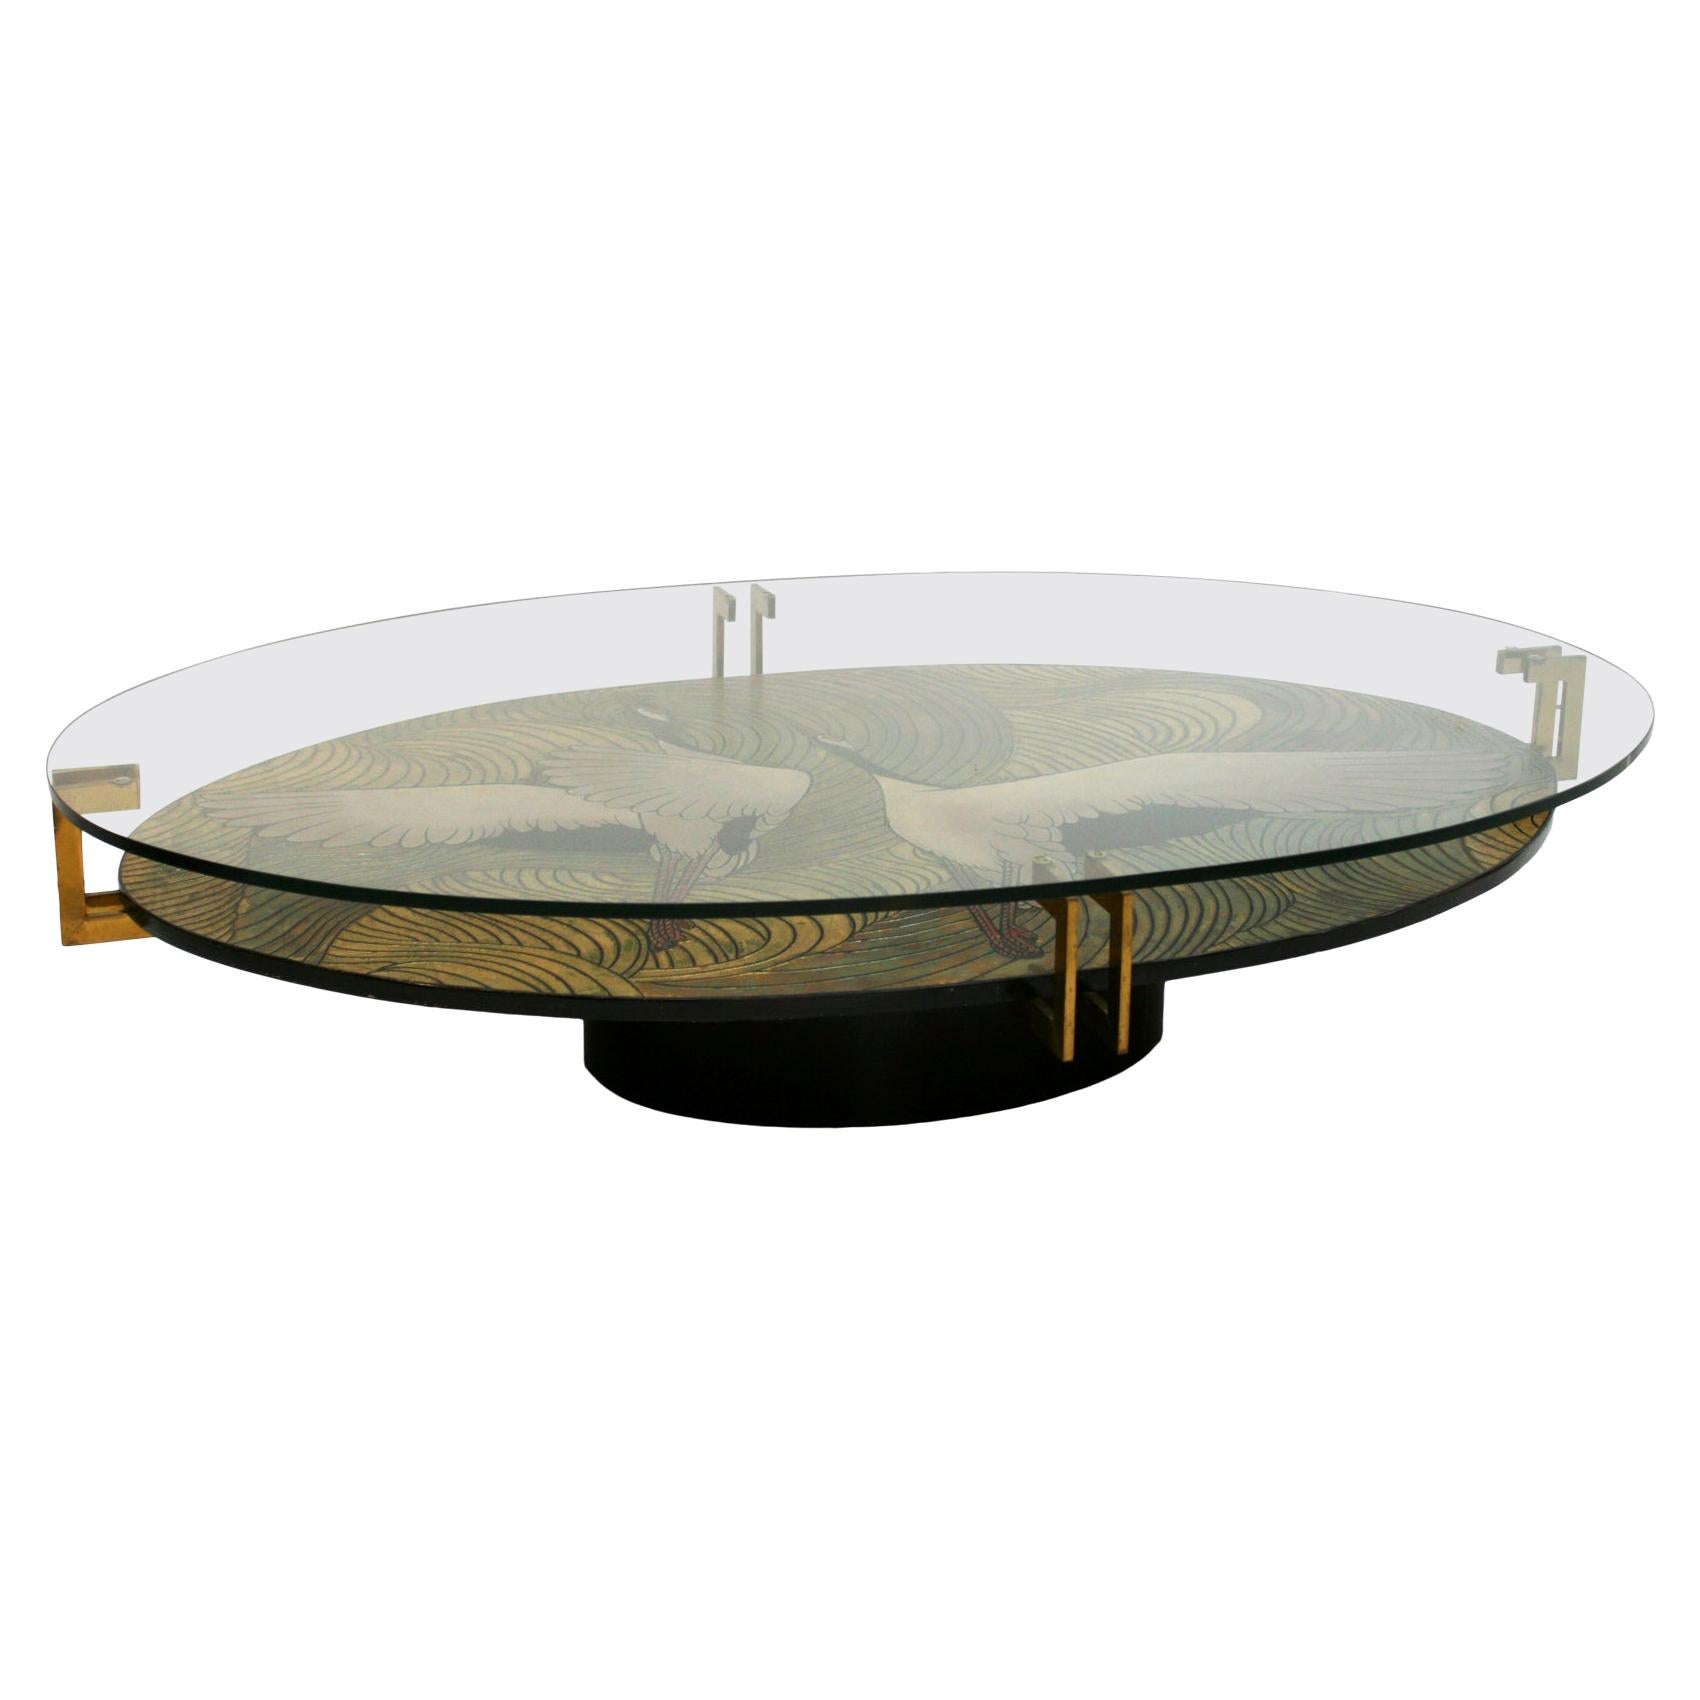 Early 20th Century Coromandel Lacquered Wood and Brass Oval French Table